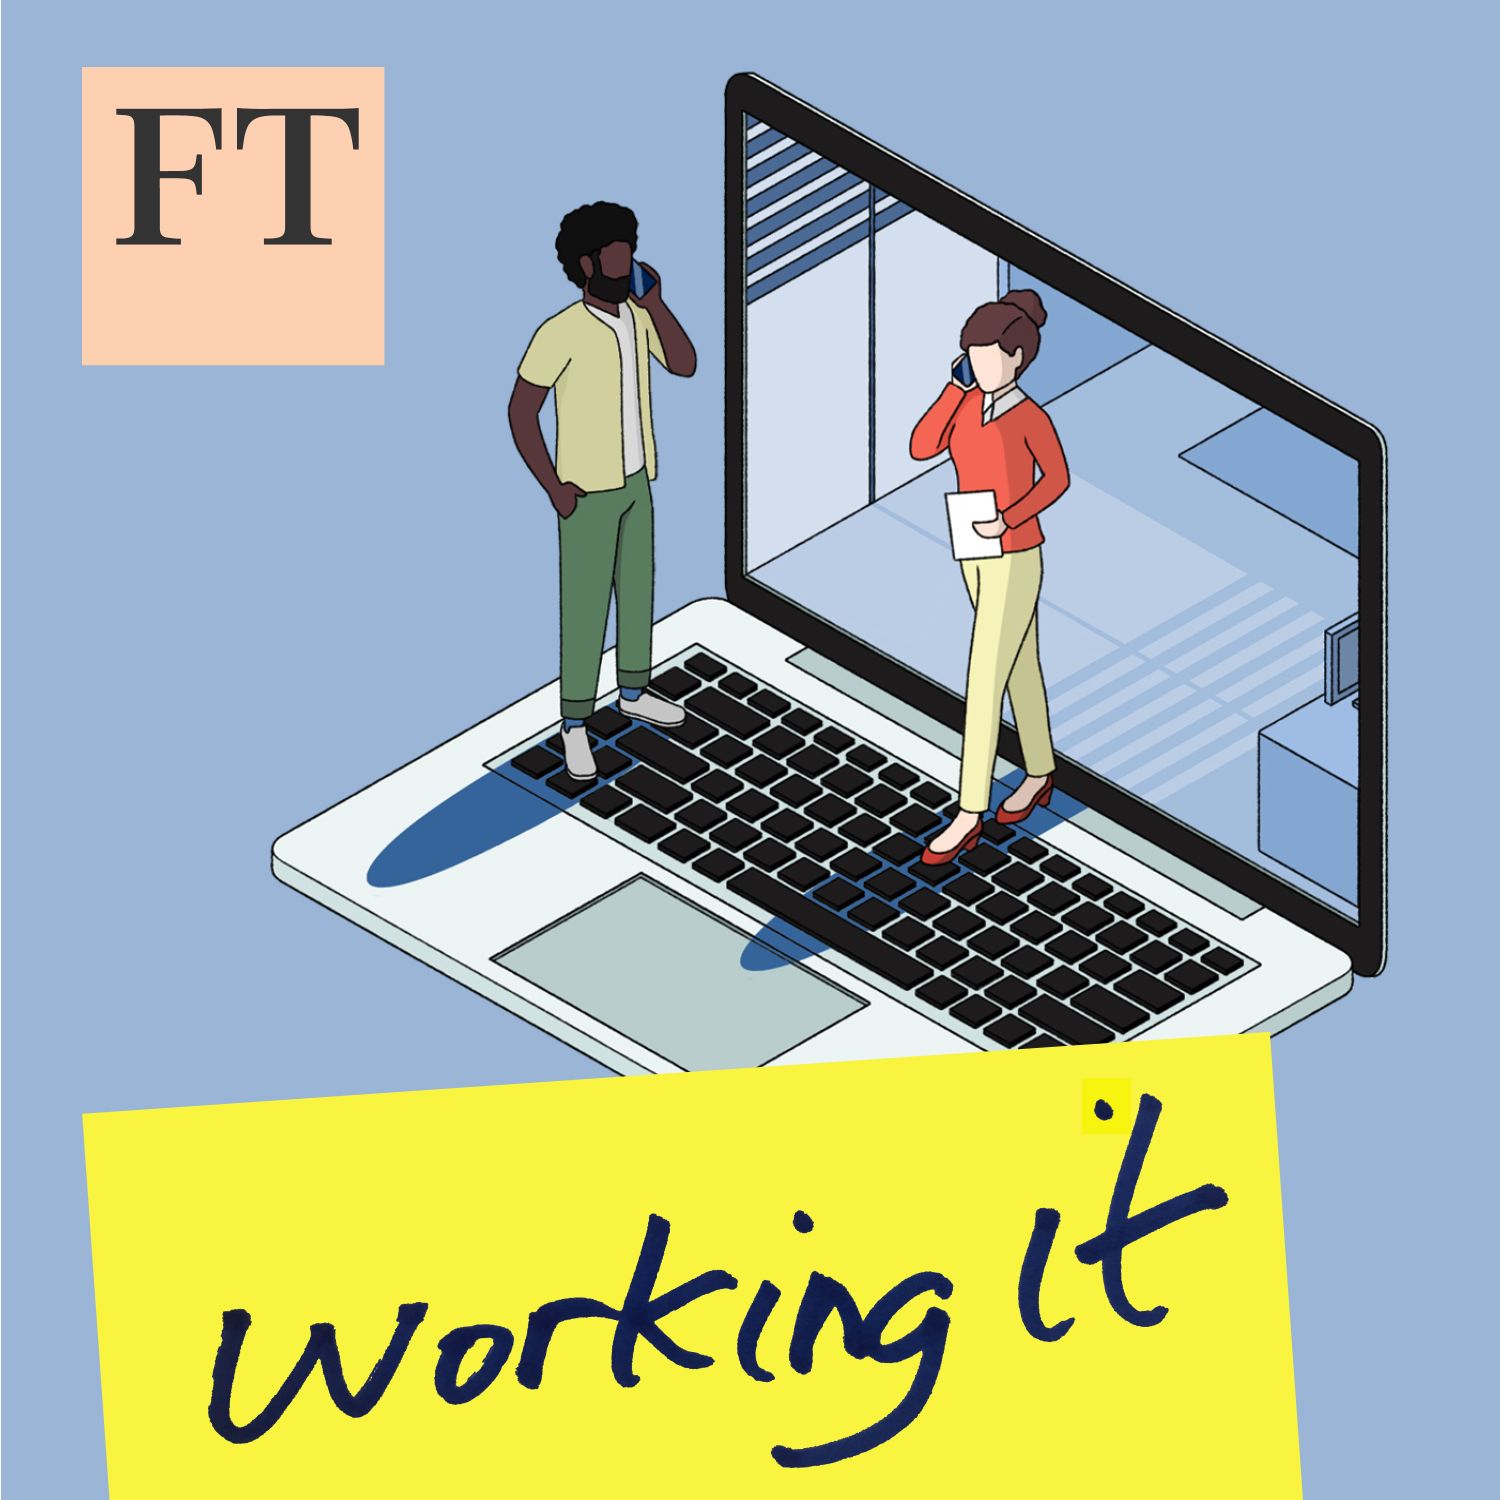 If You Want a Better Work Life: ‘Working It’